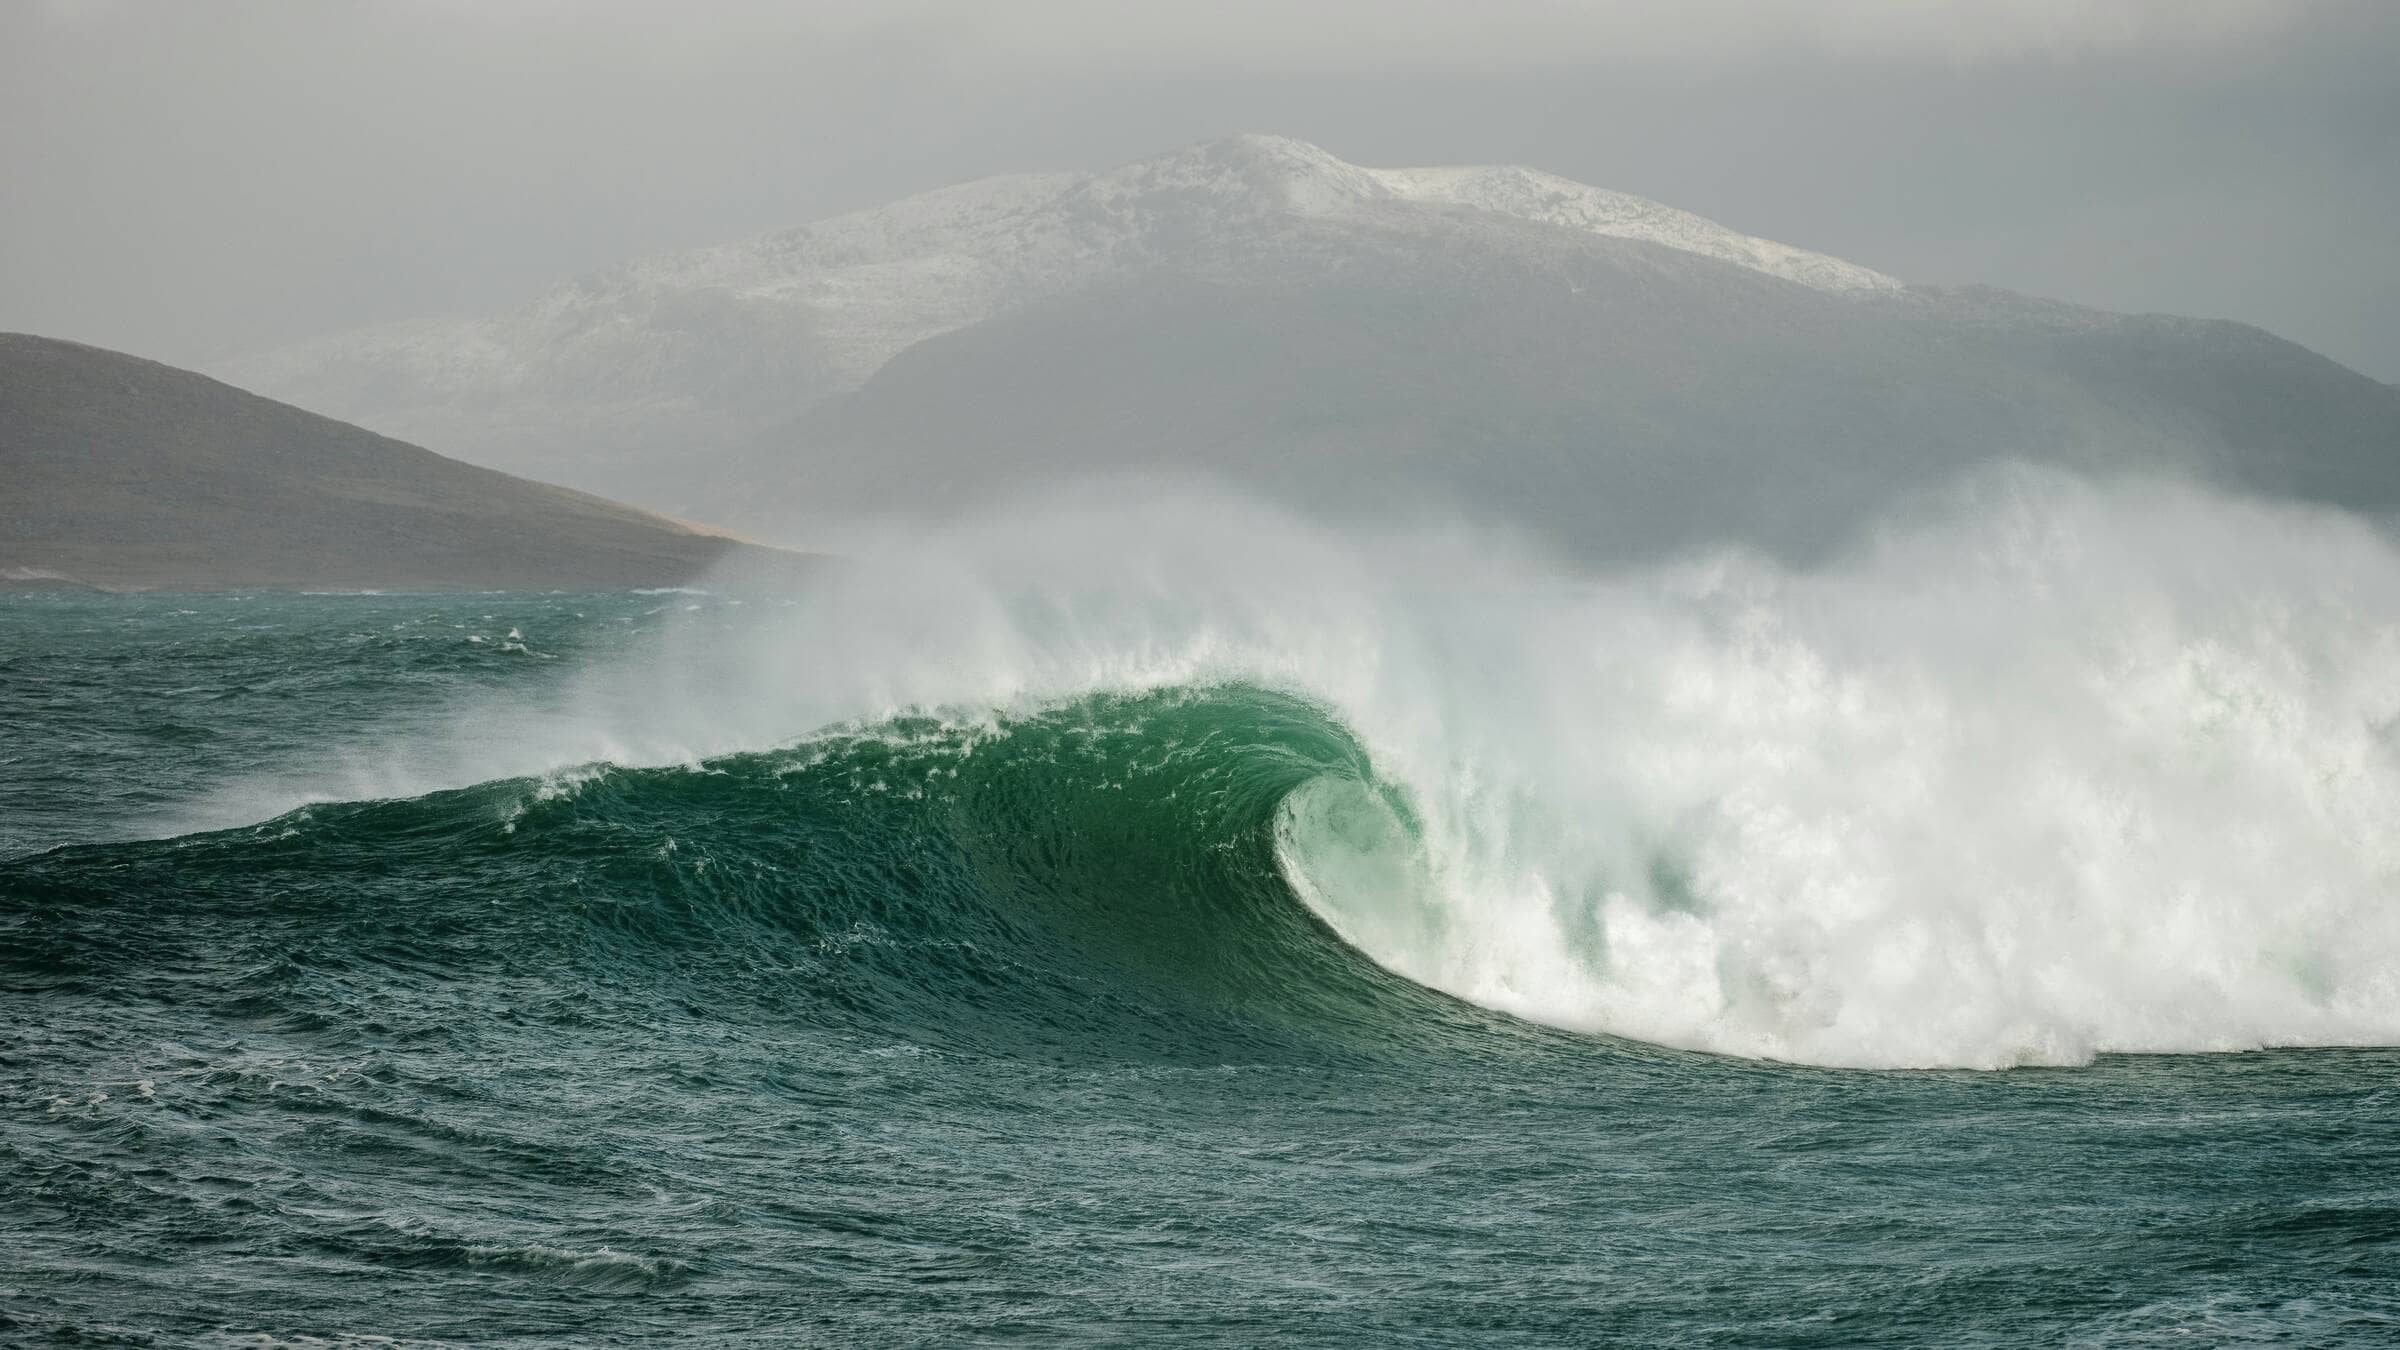 photo of a wave with mountains in background